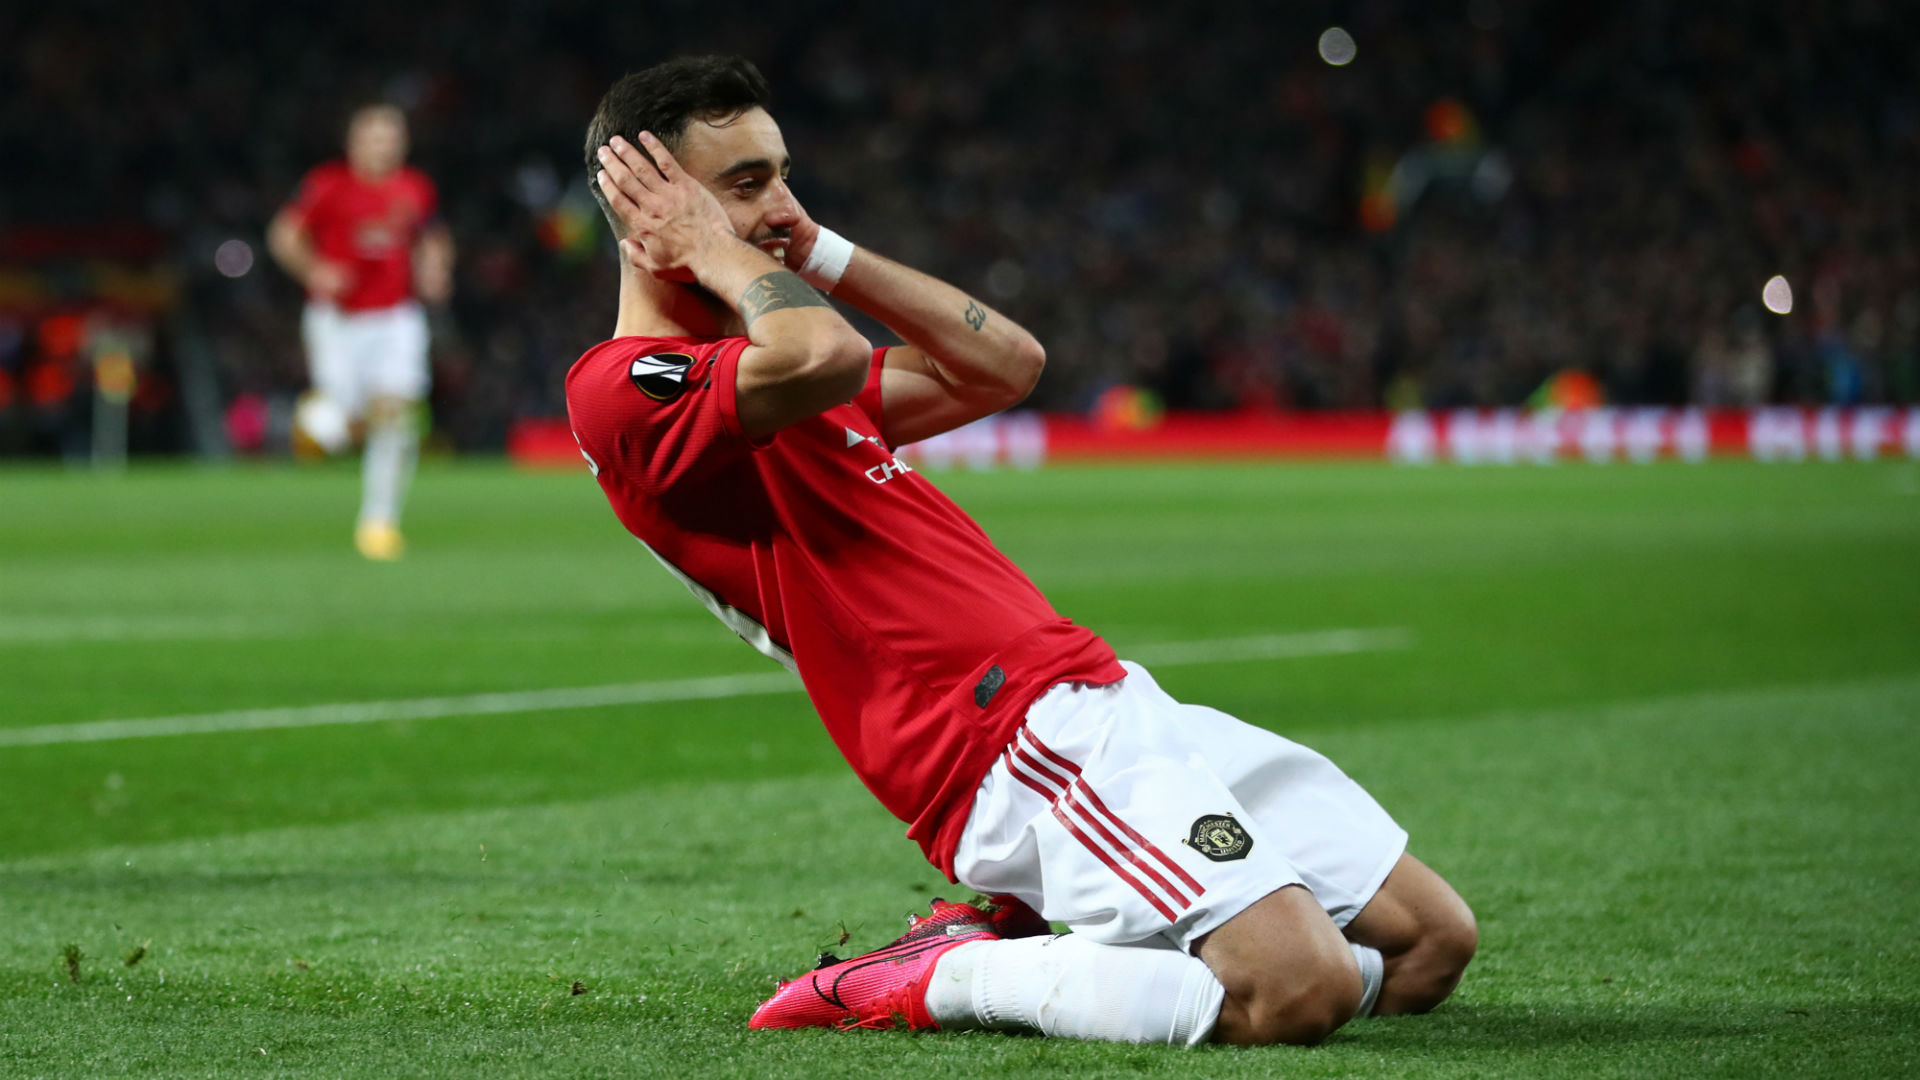 Bruno Fernandes a big boost, but Man Utd need one or two more pieces – Solskjaer